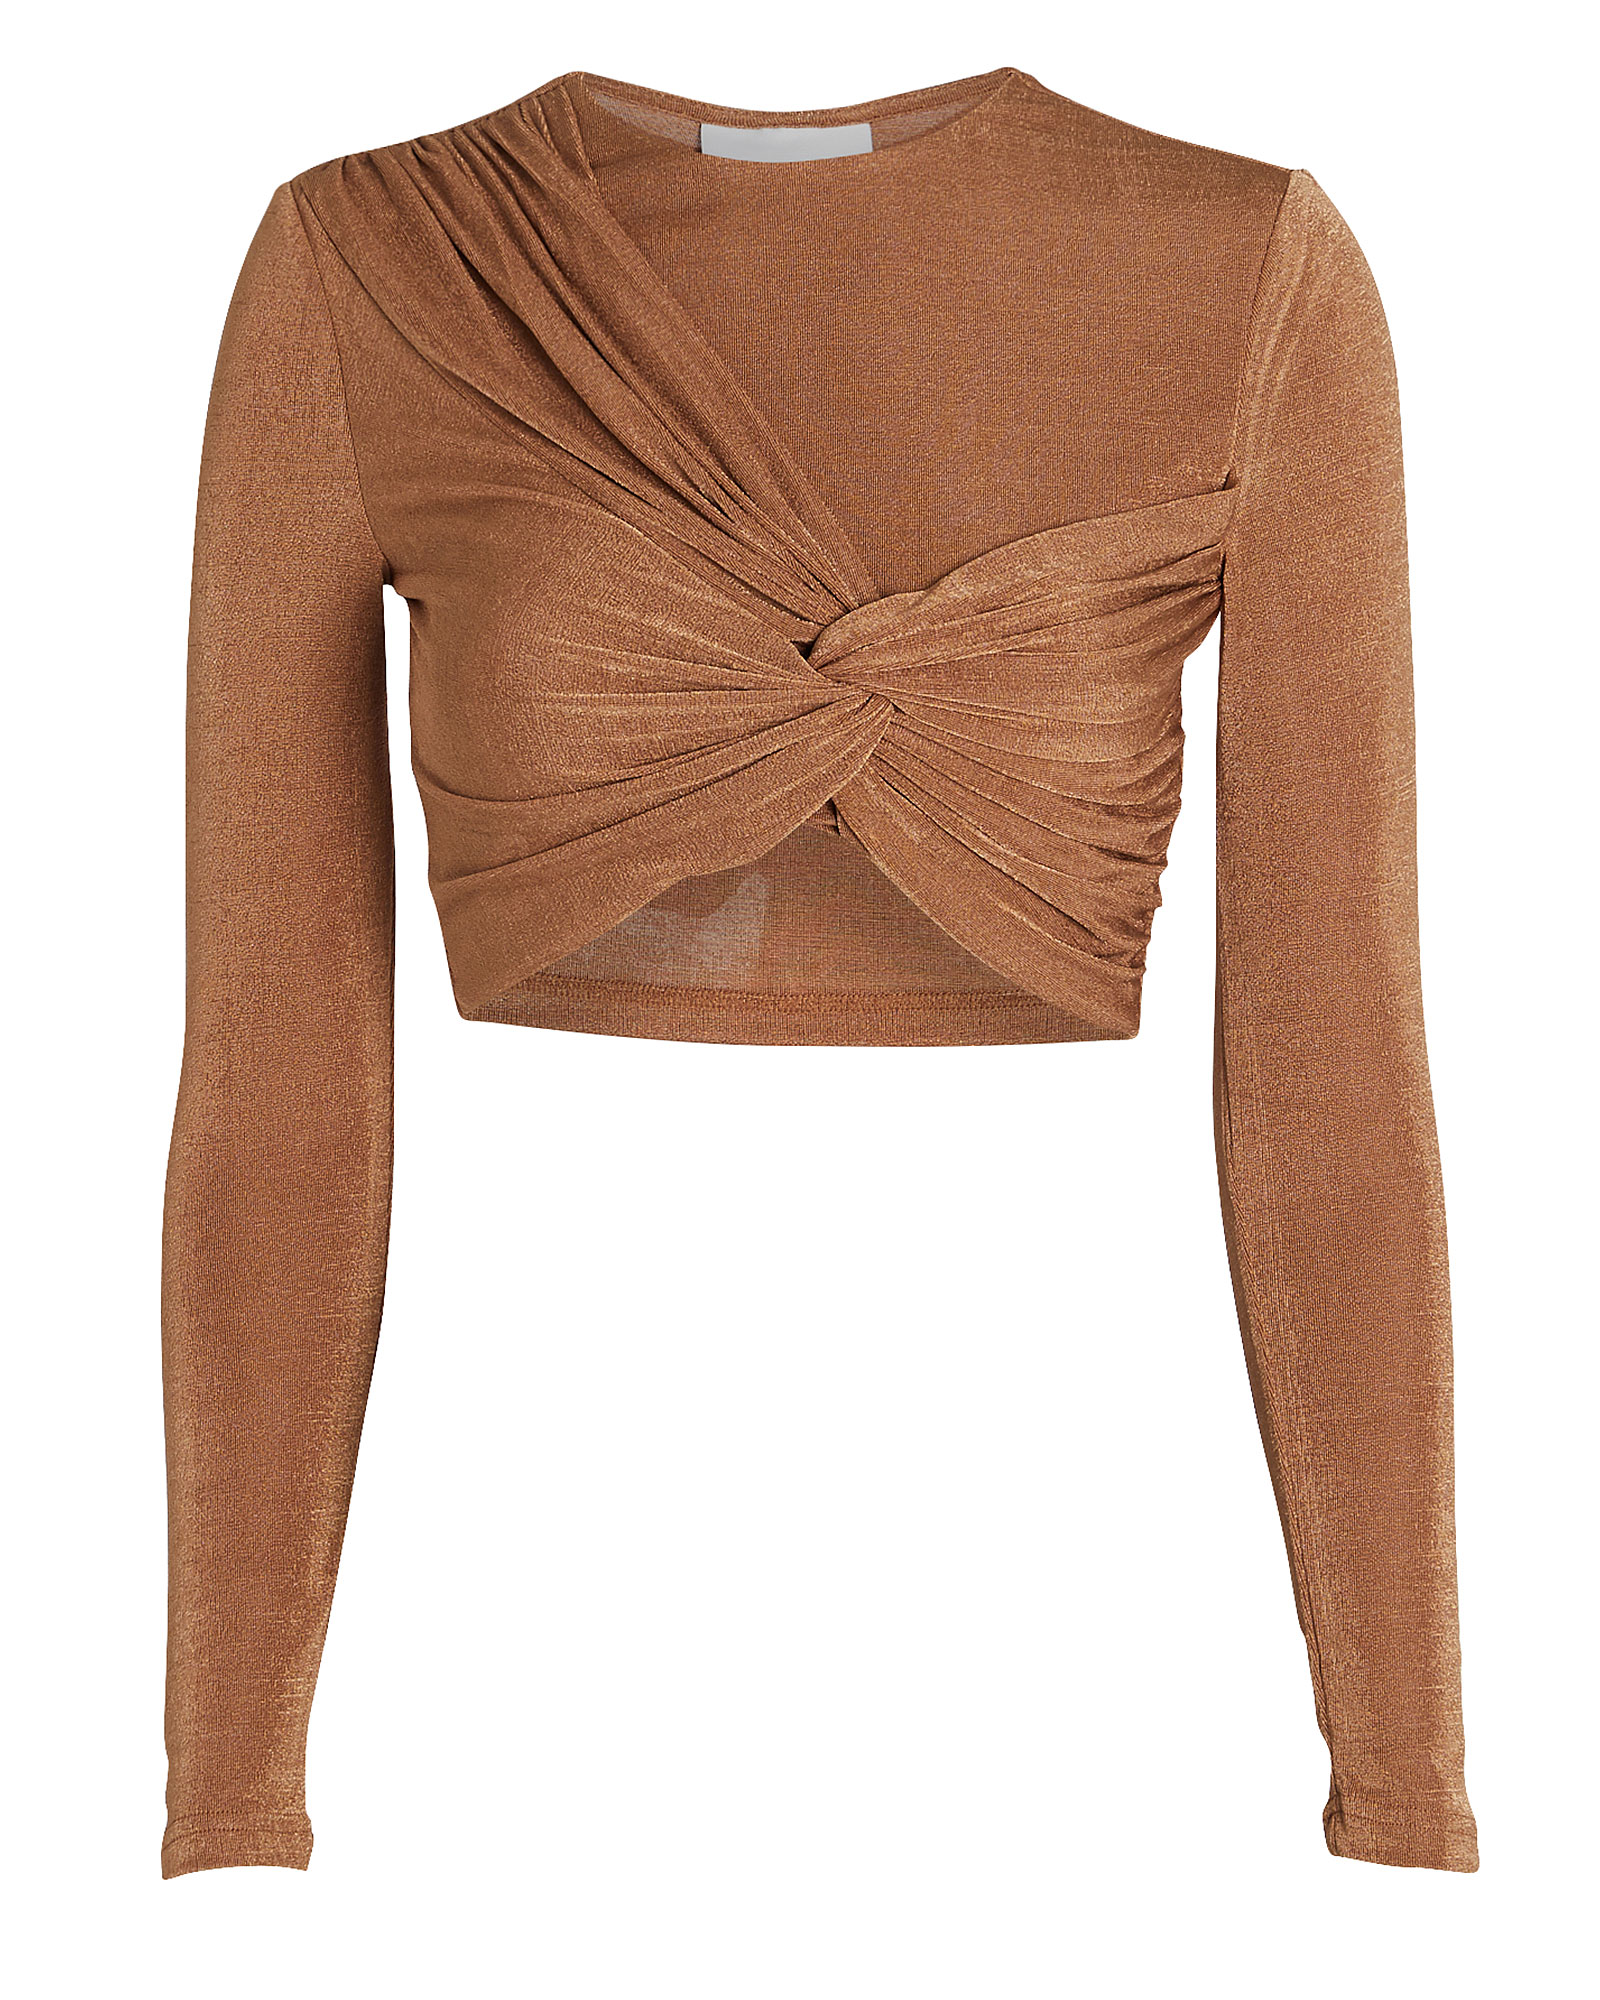 Significant Other | Sabine Gathered Jersey Top | INTERMIX®